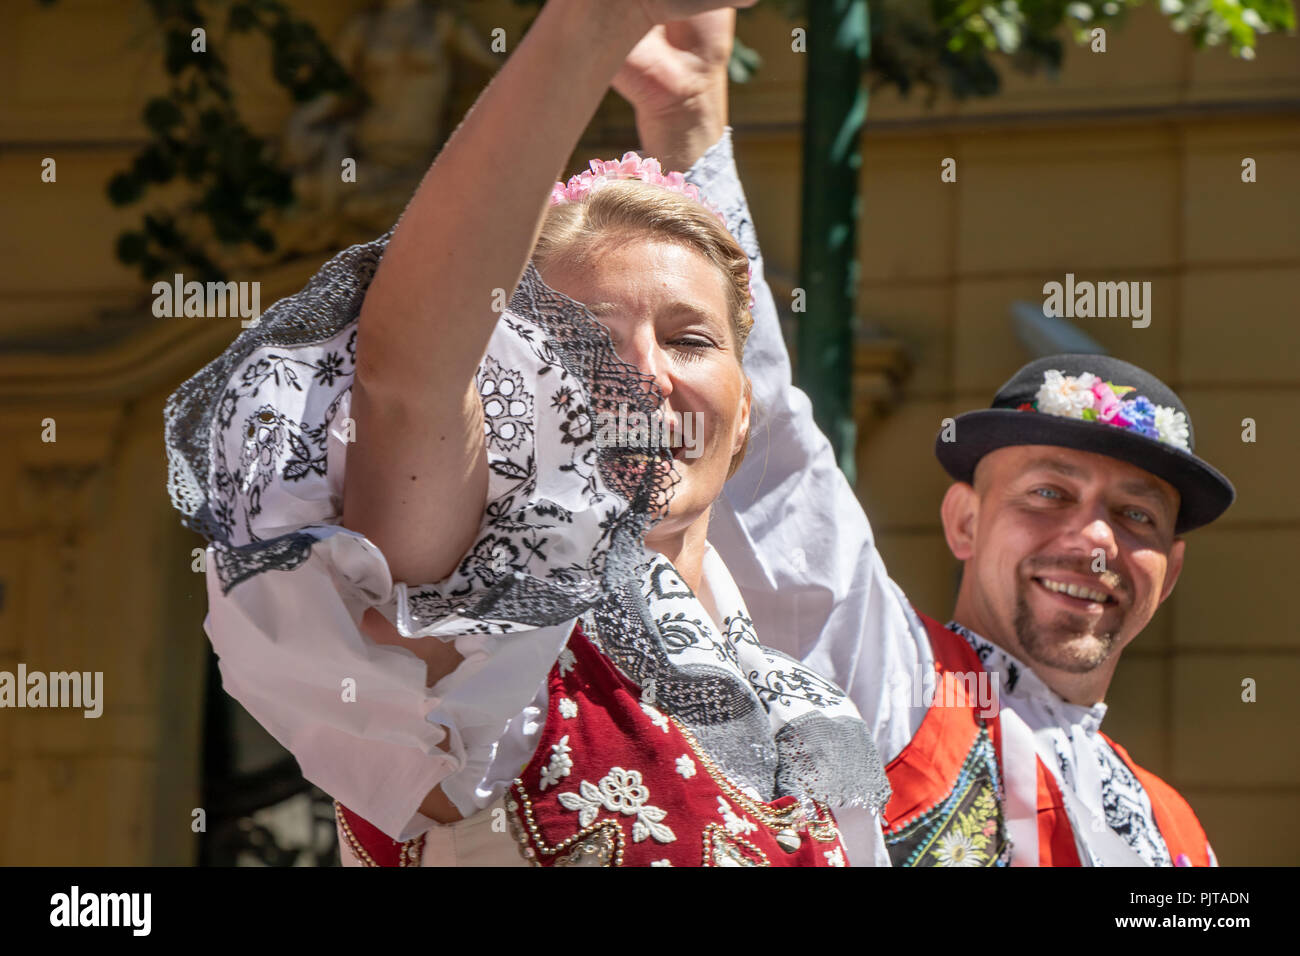 PRAGUE, CZECH REPUBLIC - JULY 1, 2018: People in Moravian folk costumes parading at Sokolsky Slet, a once-every-six-years gathering of the Sokol movem Stock Photo